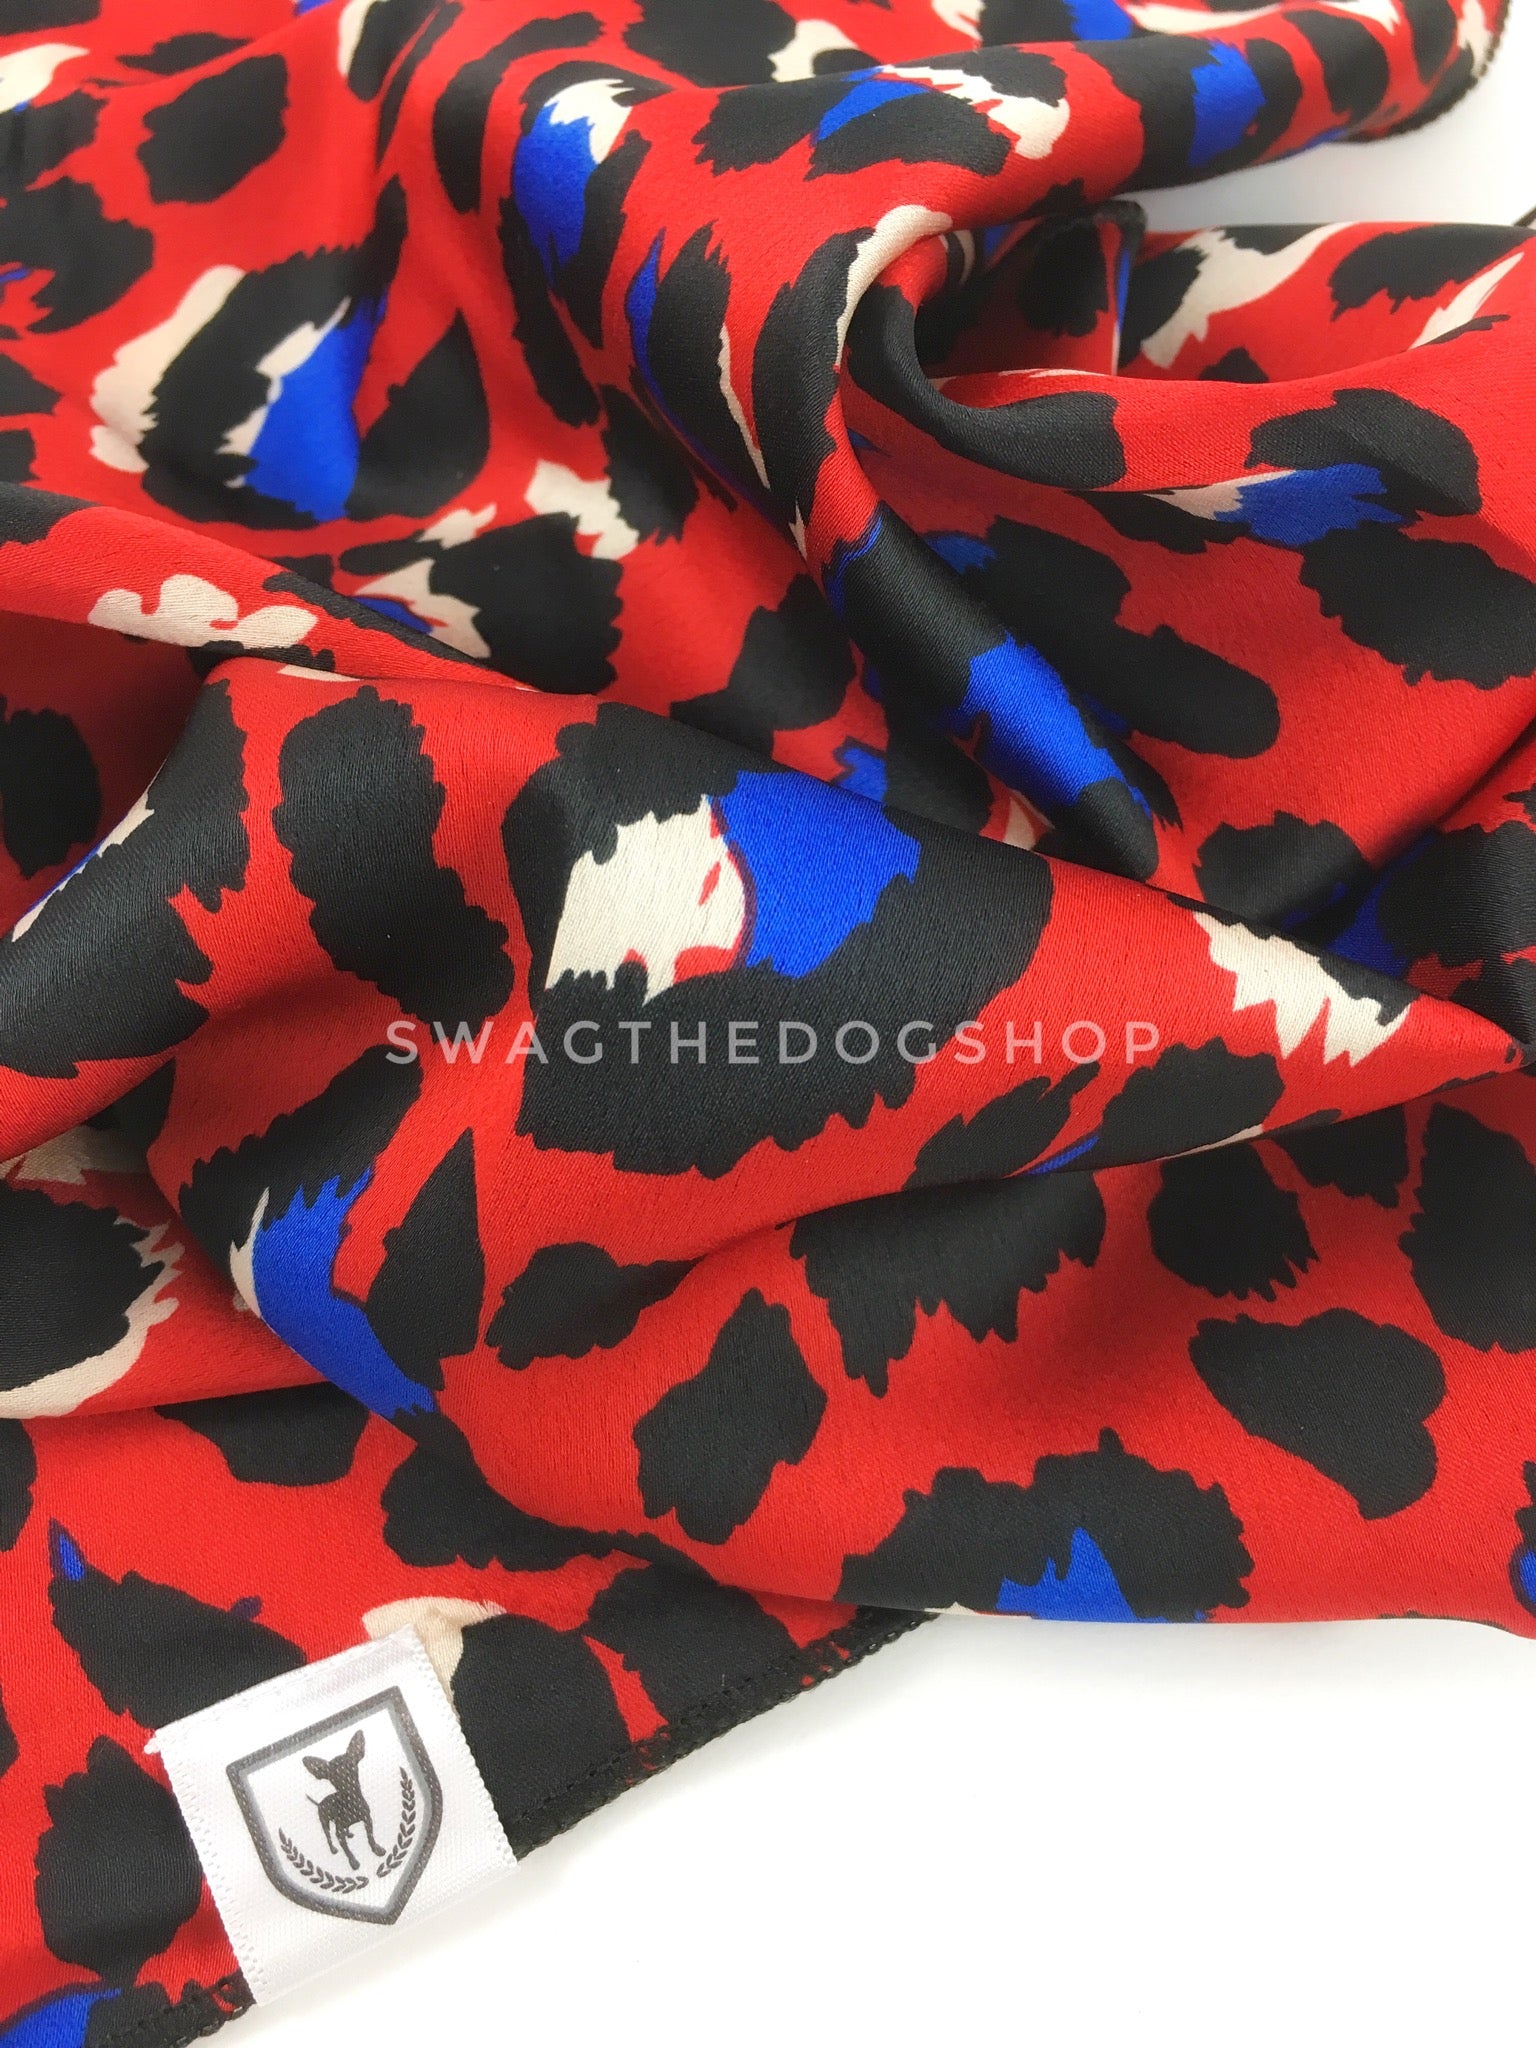 Fierce Vibrant Red with Blue Swagdana Scarf - Close-up View of Product. Dog Bandana. Dog Scarf